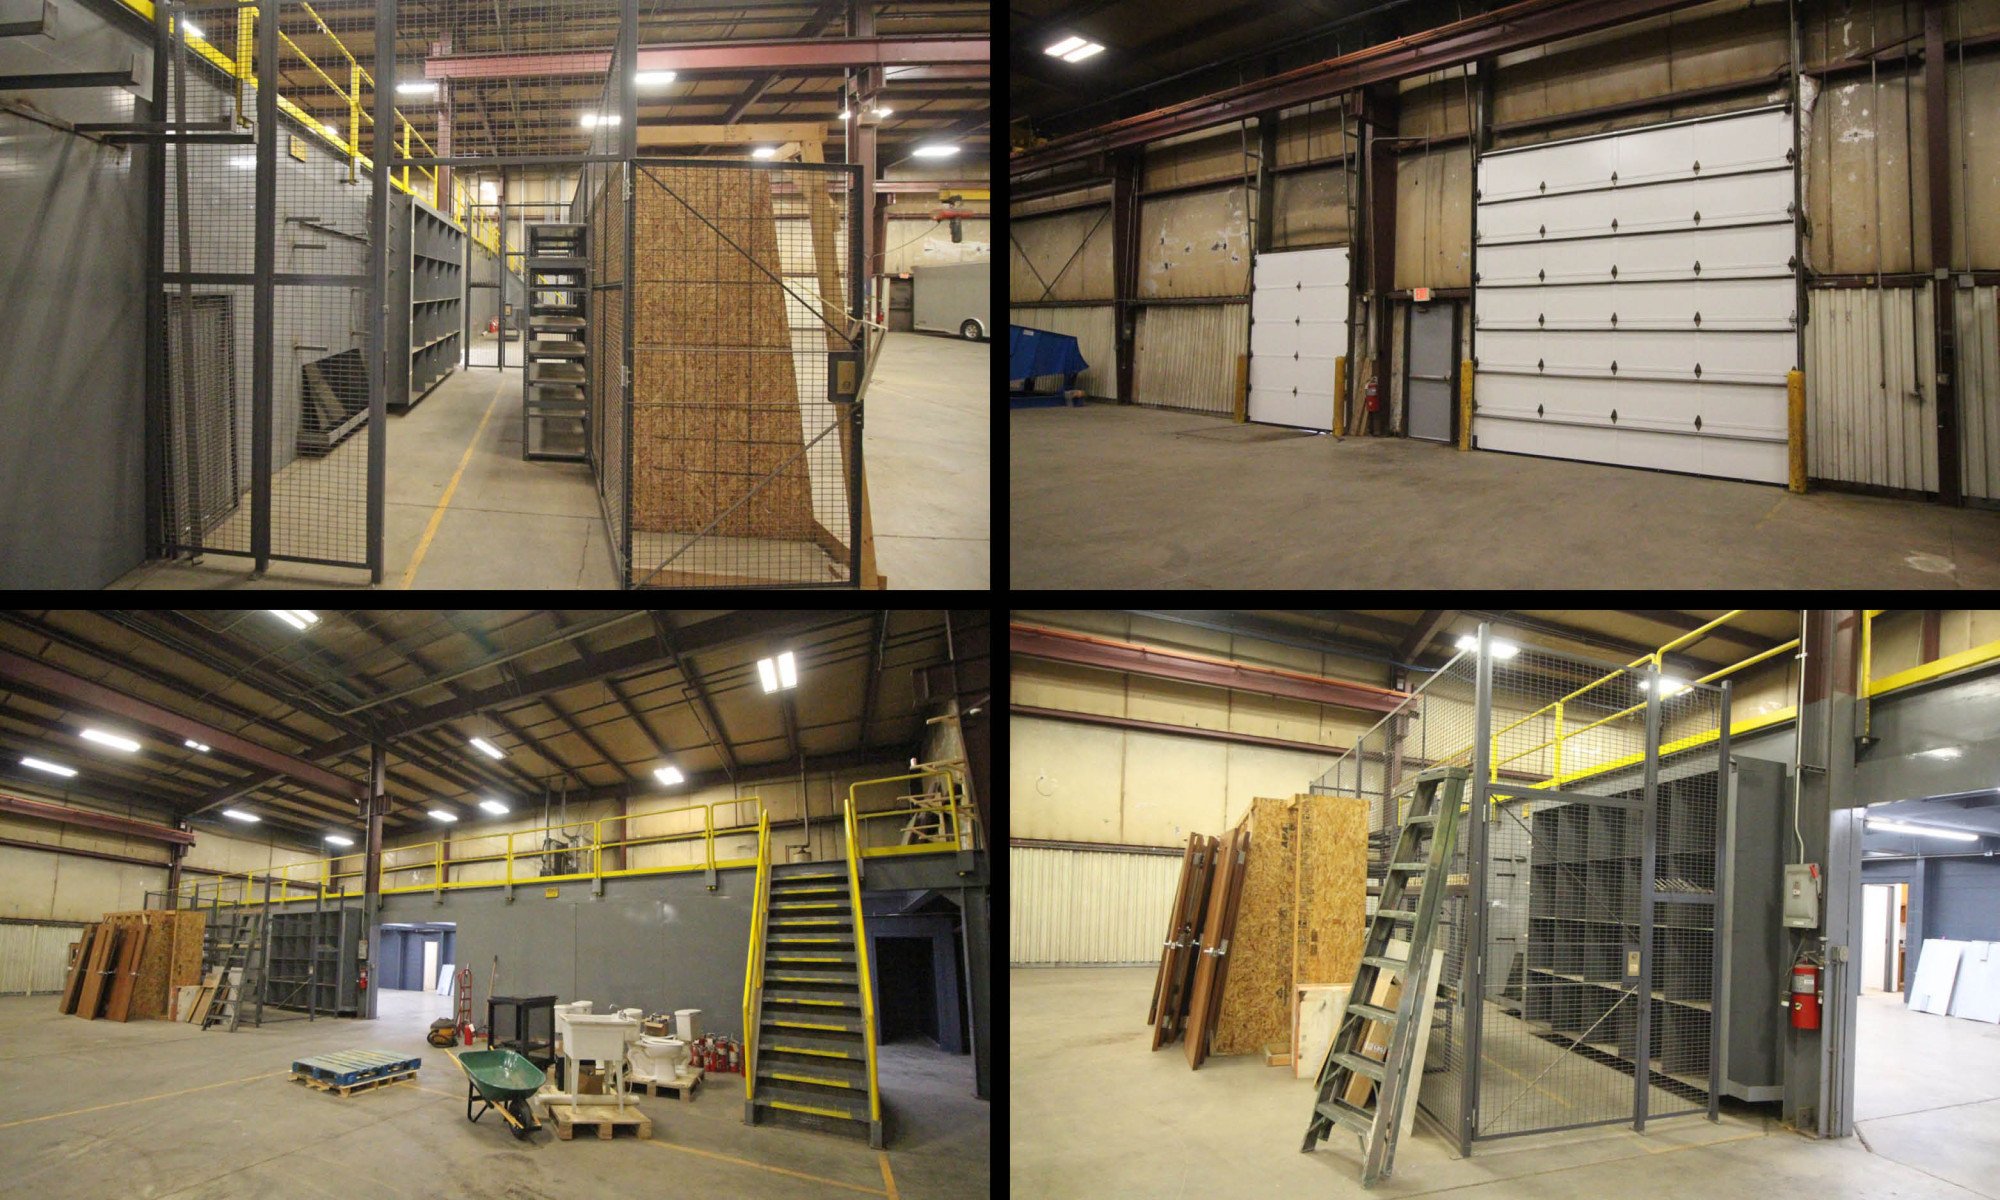 Sturges Property Group - Interior for 333 Progress Way, Avilla, IN Warehouse/Industrial